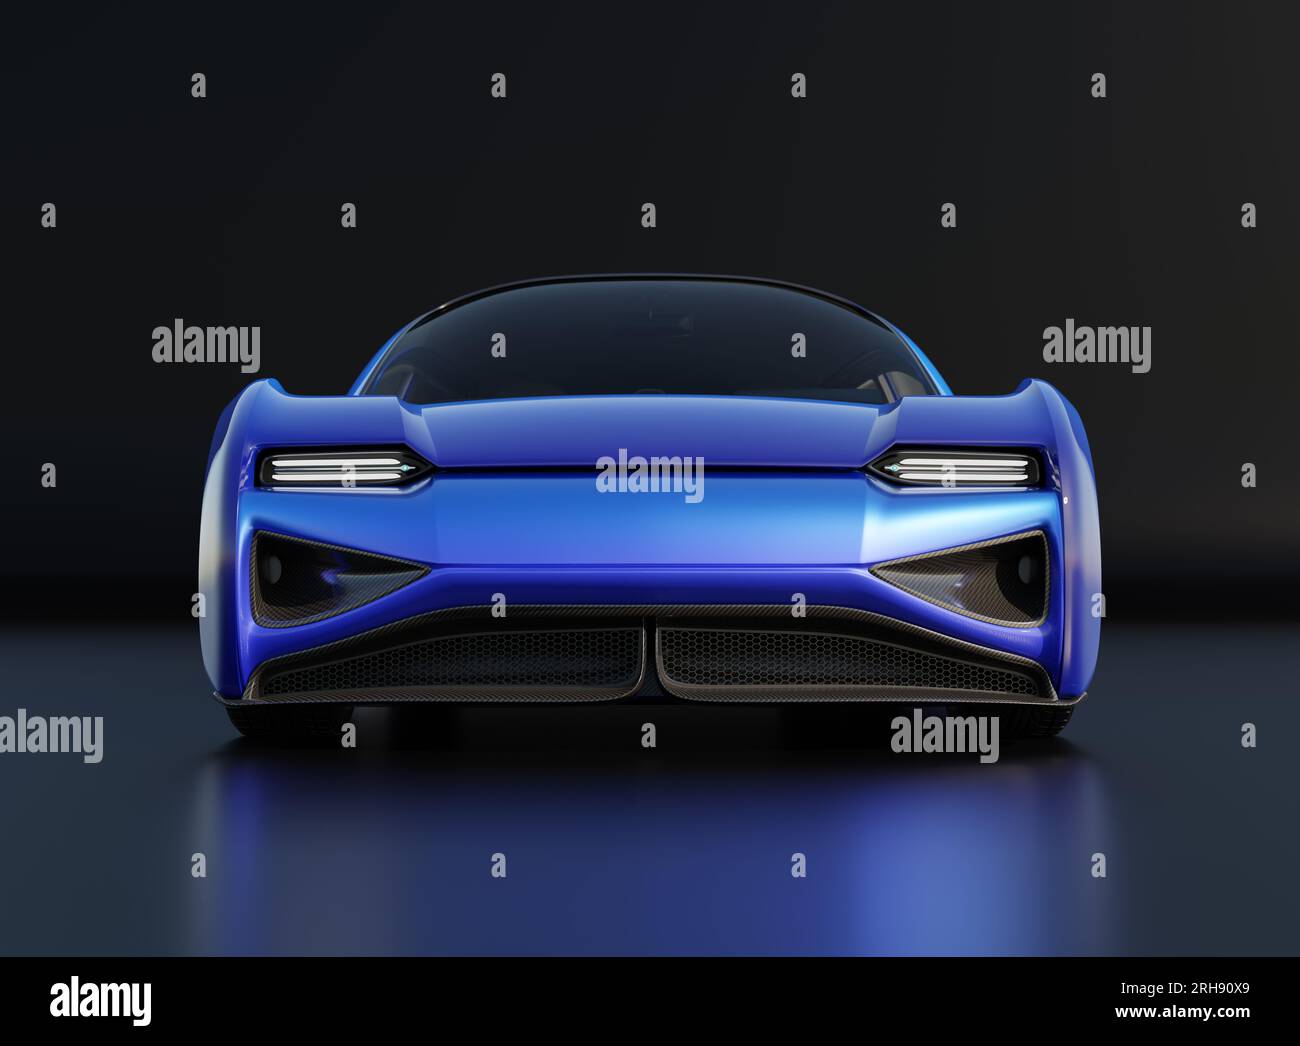 Front view of Blue Electric Car isolated on black background. Generic design, 3D rendering image. Stock Photo